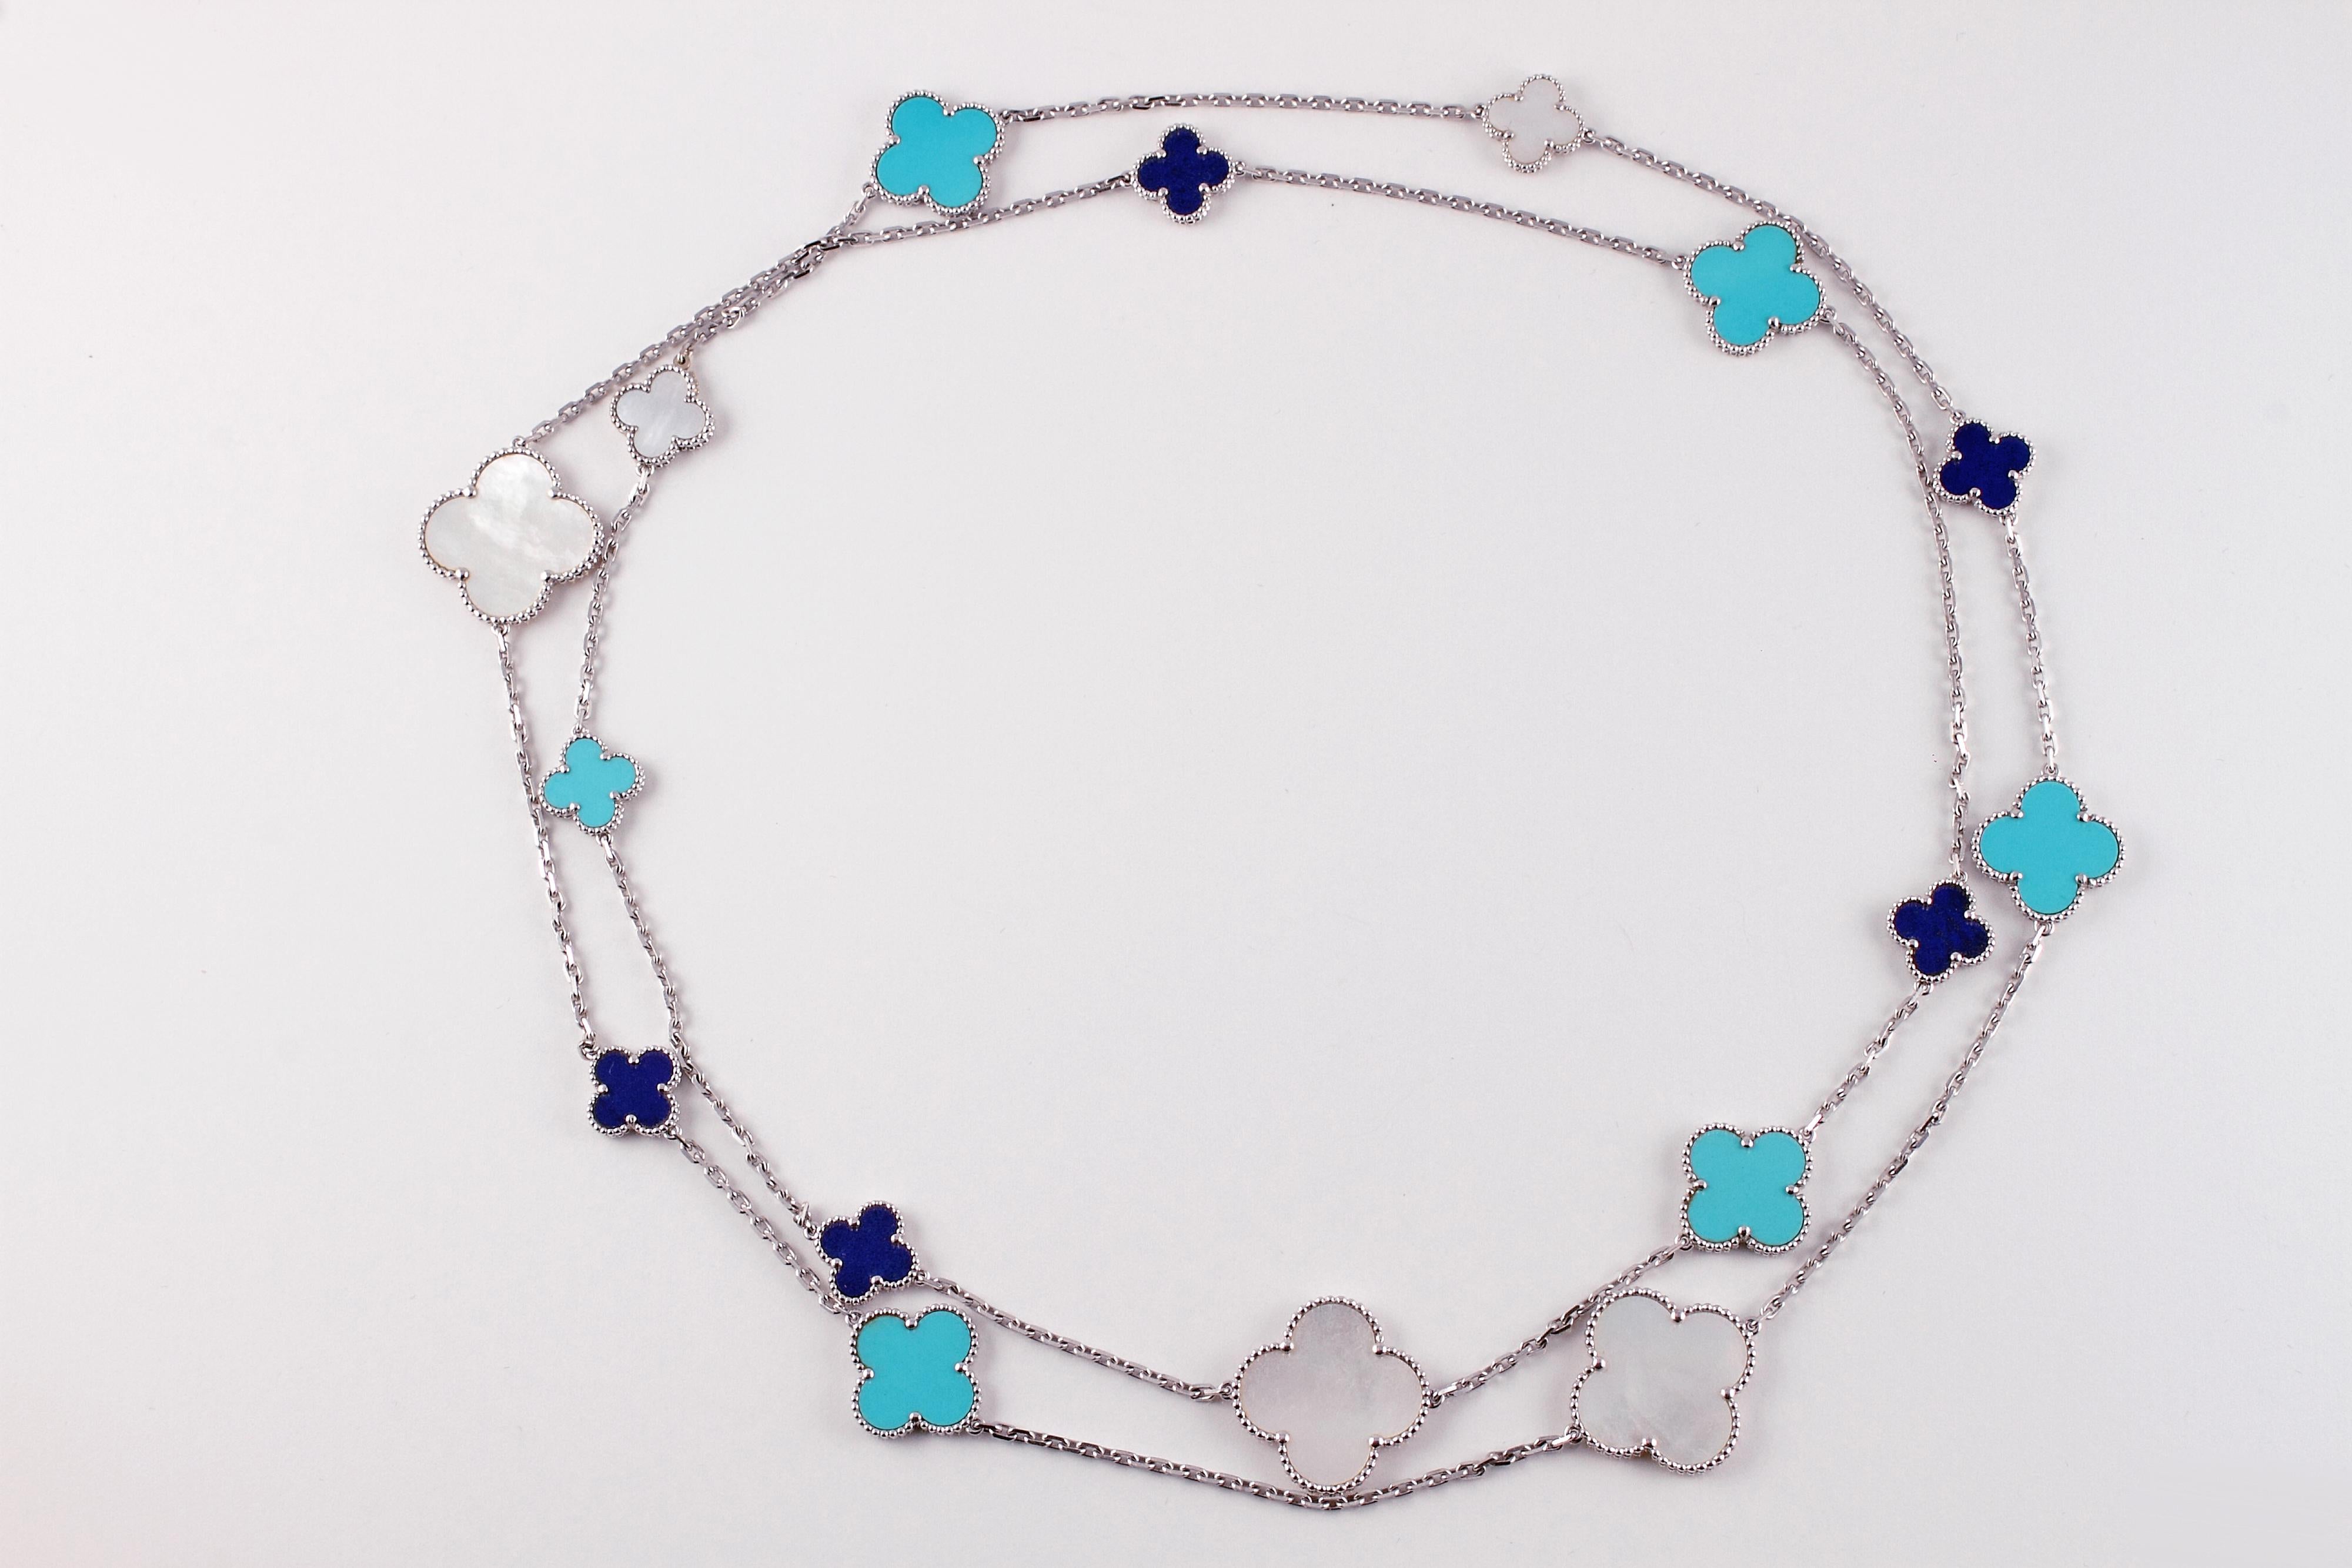 No one does it quite like Van Cleef & Arpels!  This timeless beauty is in 18 karat white gold and features 16 mixed motif stations, in lapis, turquoise and mother of pearl.  The retail price of this special limited edition necklace was $31,000 in